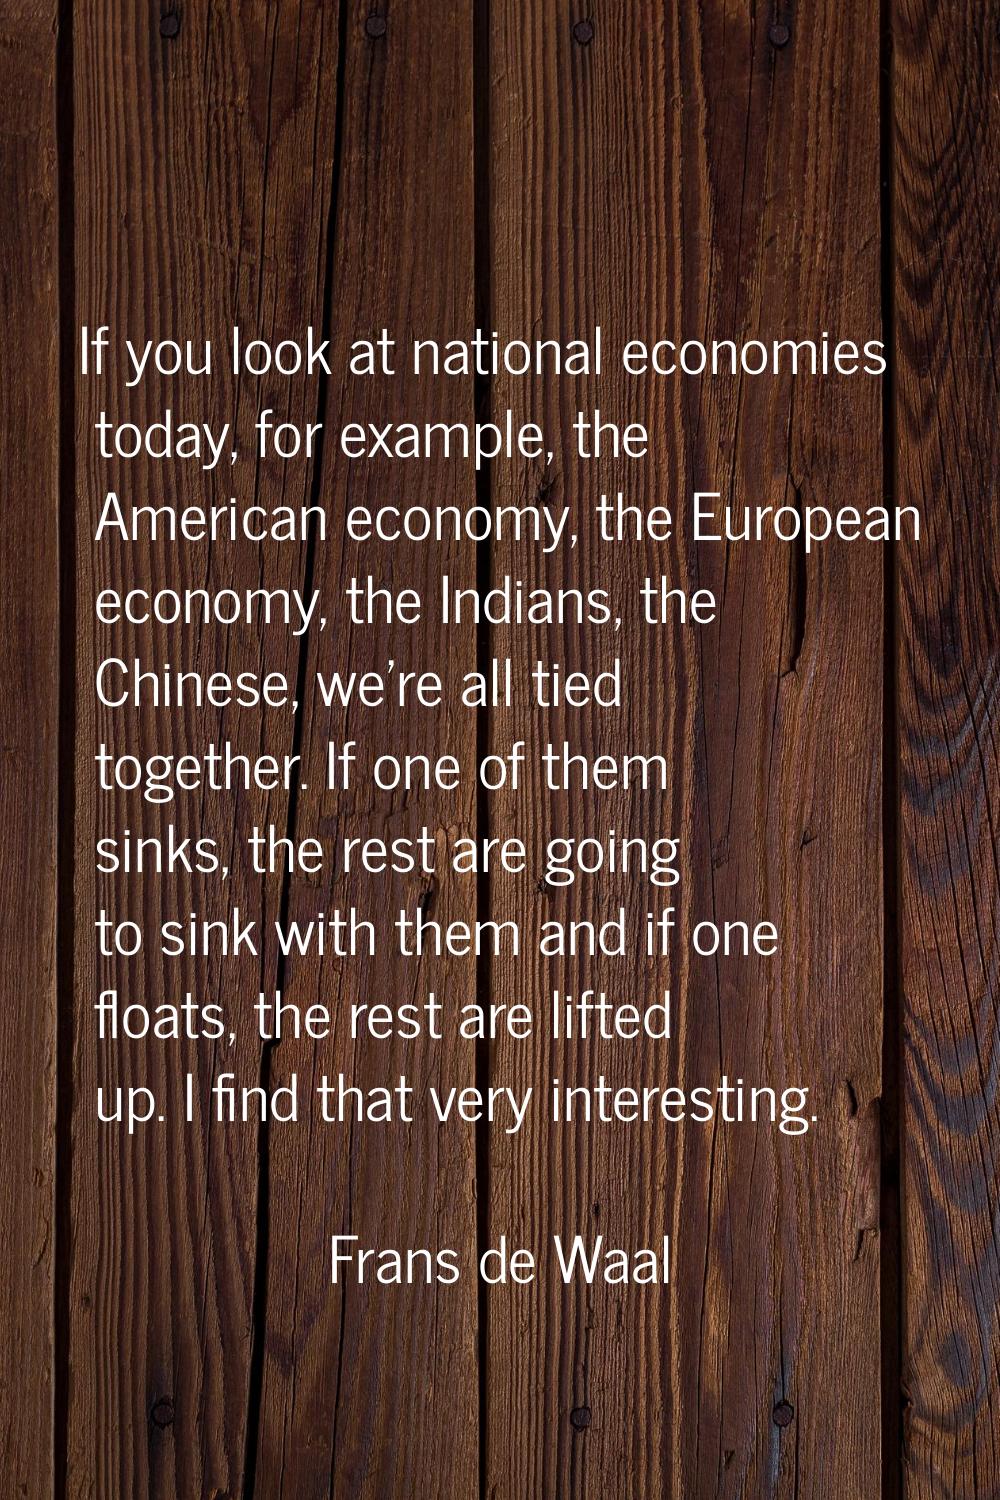 If you look at national economies today, for example, the American economy, the European economy, t